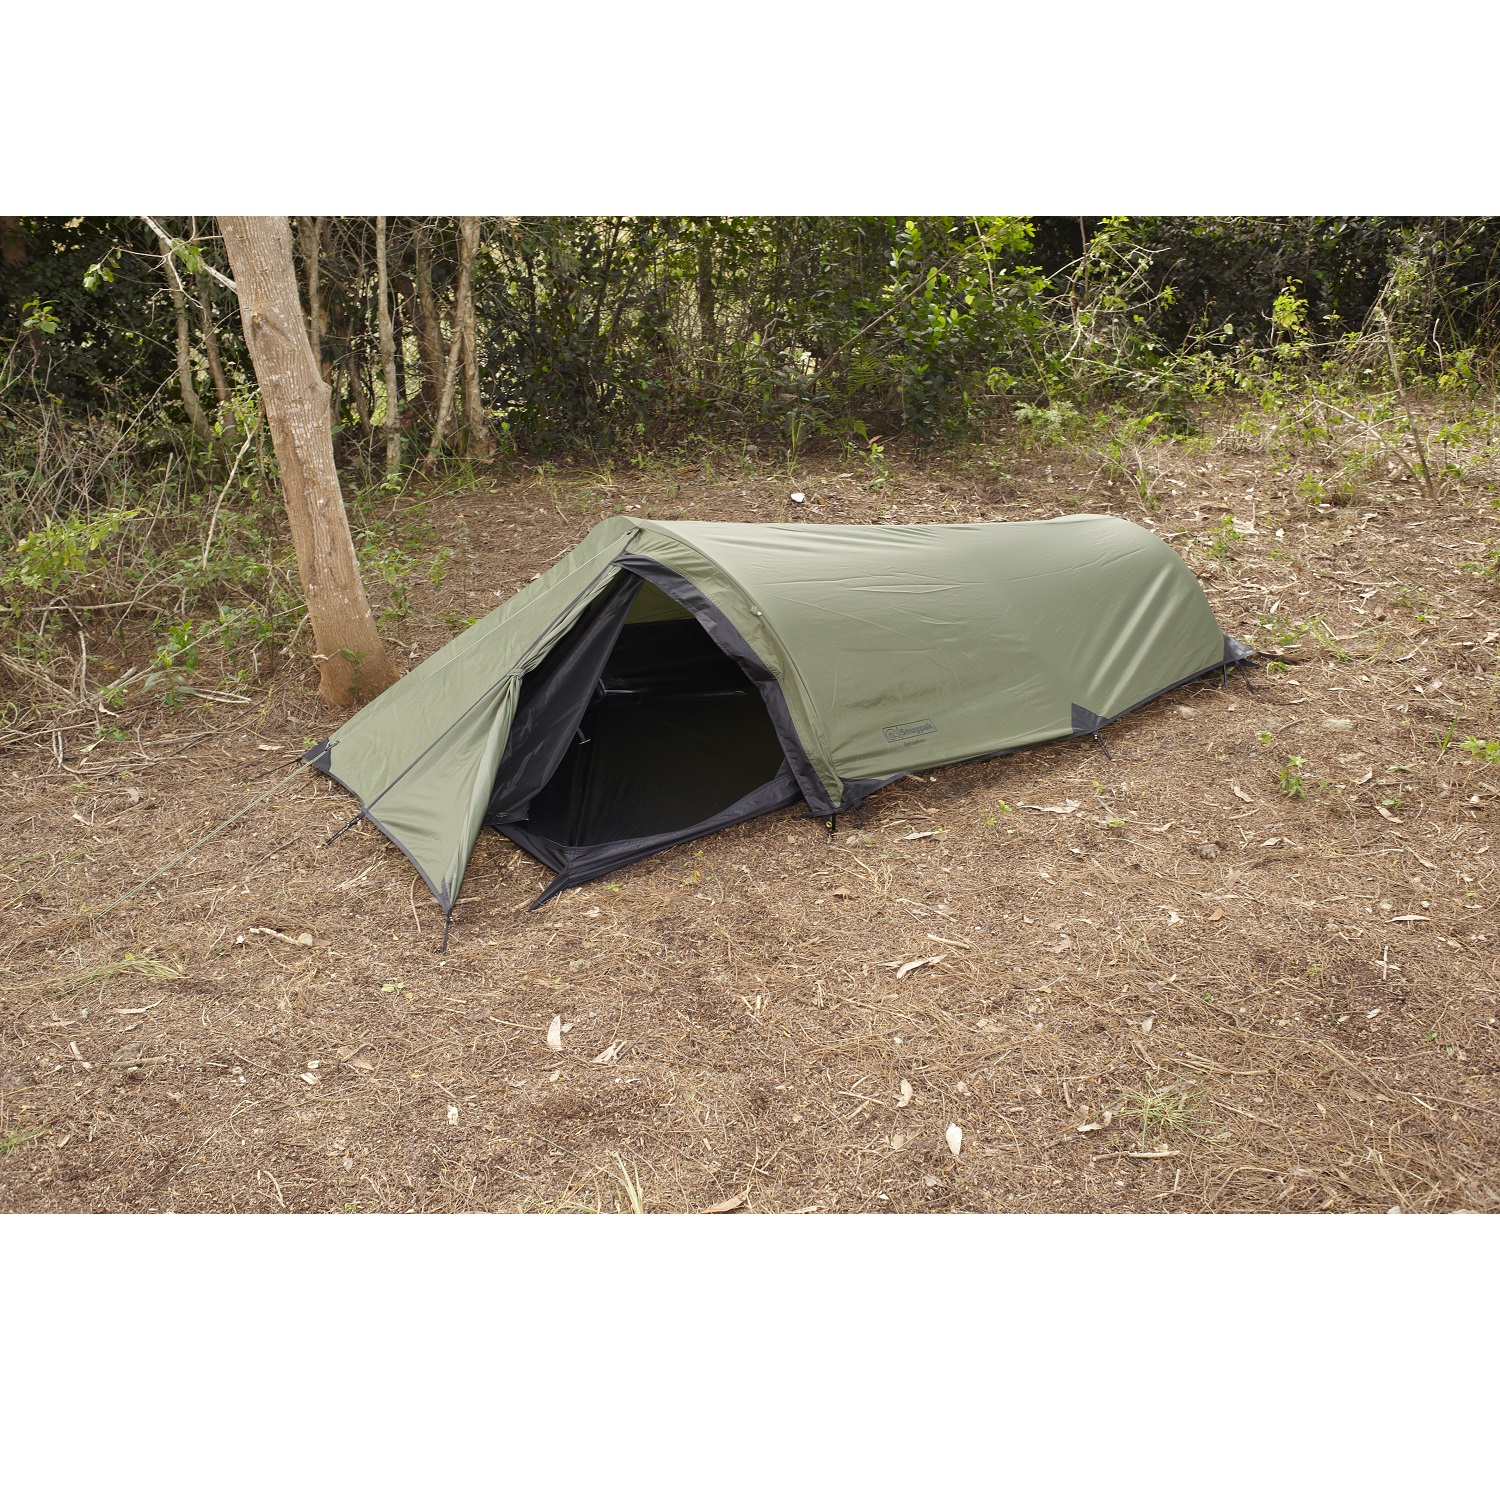 SnugPak 1-Person Backpacking Tent - image 1 of 2